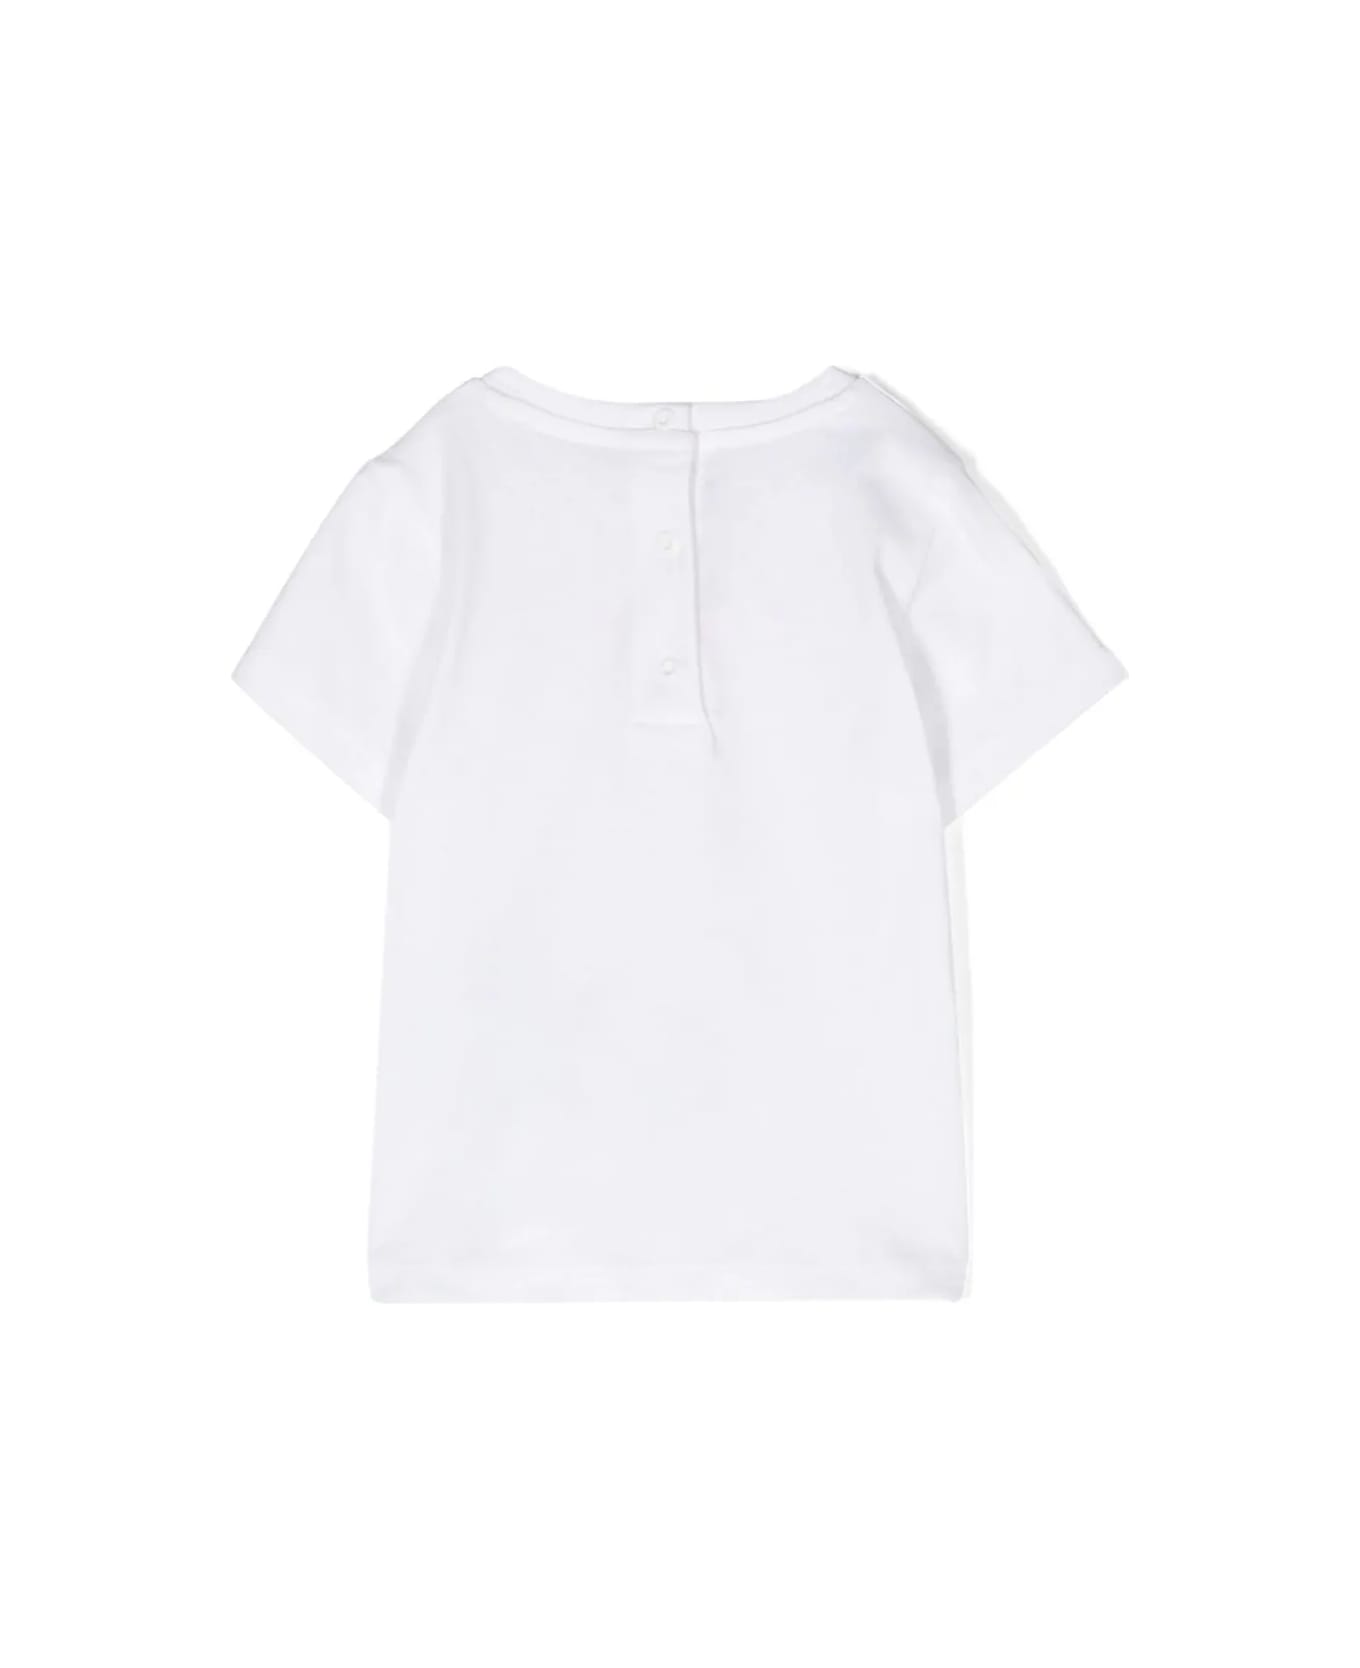 Balmain T-shirt With Embroidery - White